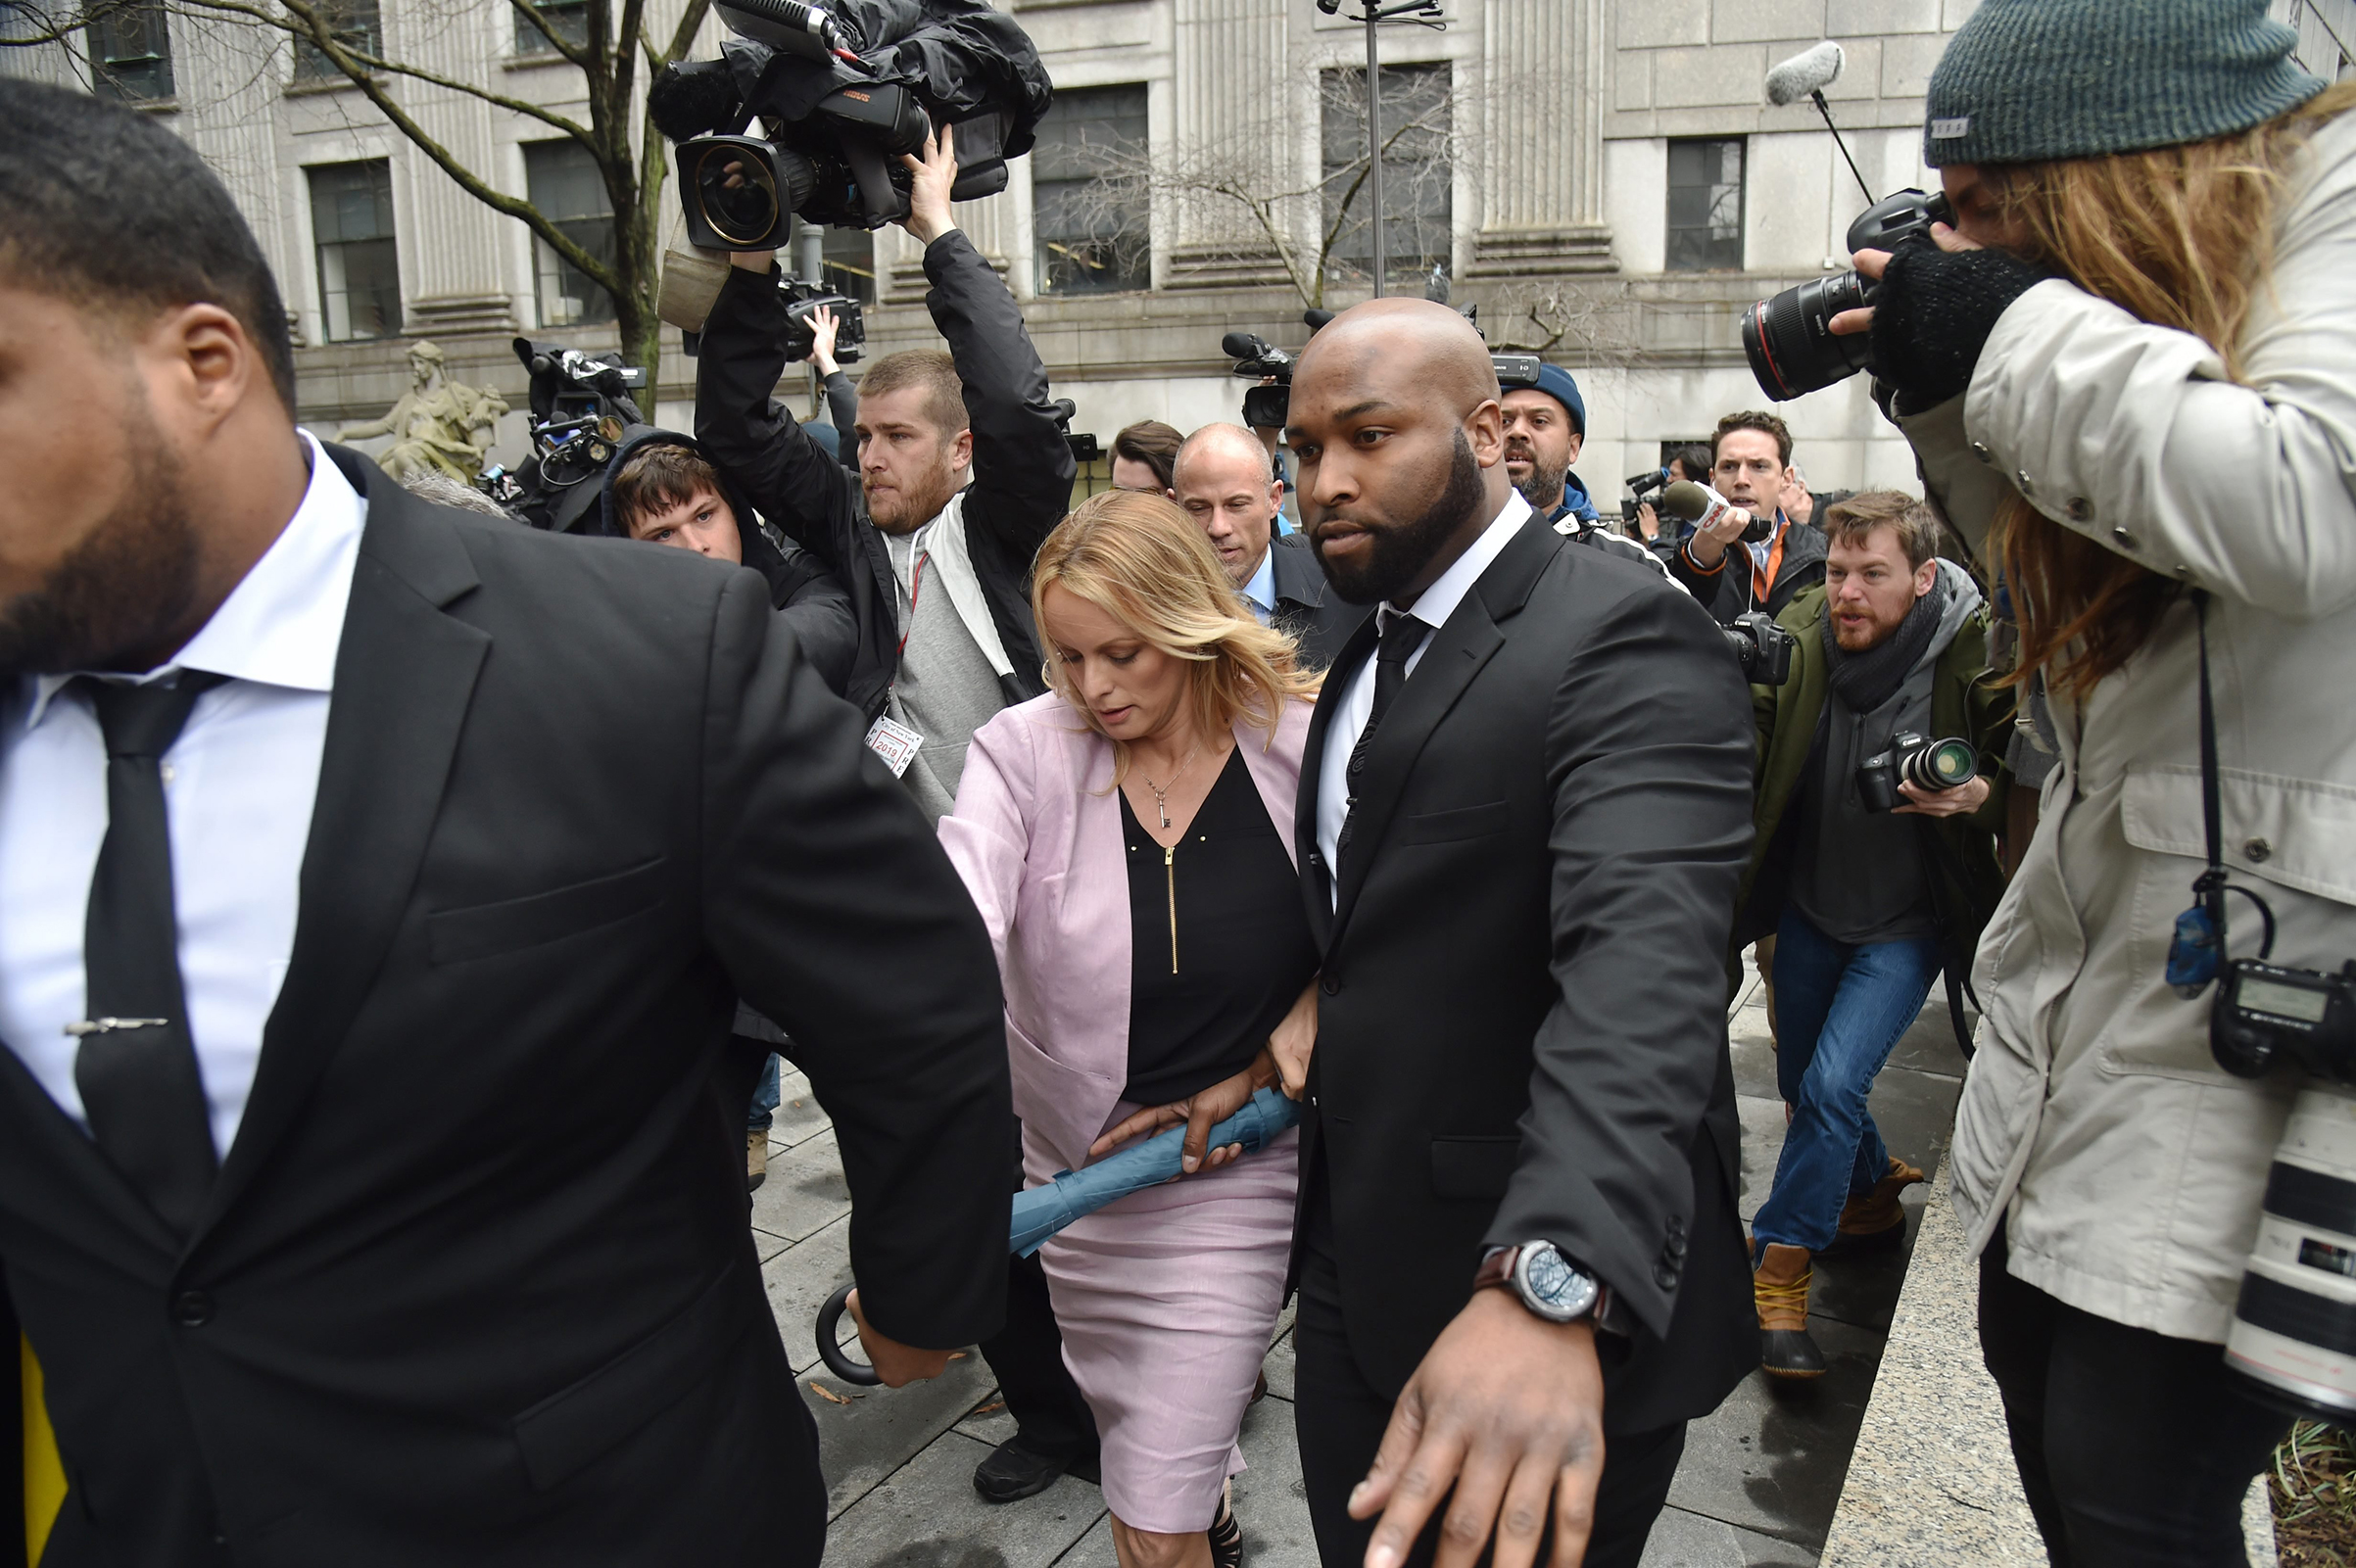 Adult-film actress Stephanie Clifford, center, also known as Stormy Daniels, arrives for a court hearing in New York City on April 16, 2018. (Hector Retamal—AFP/Getty Images)